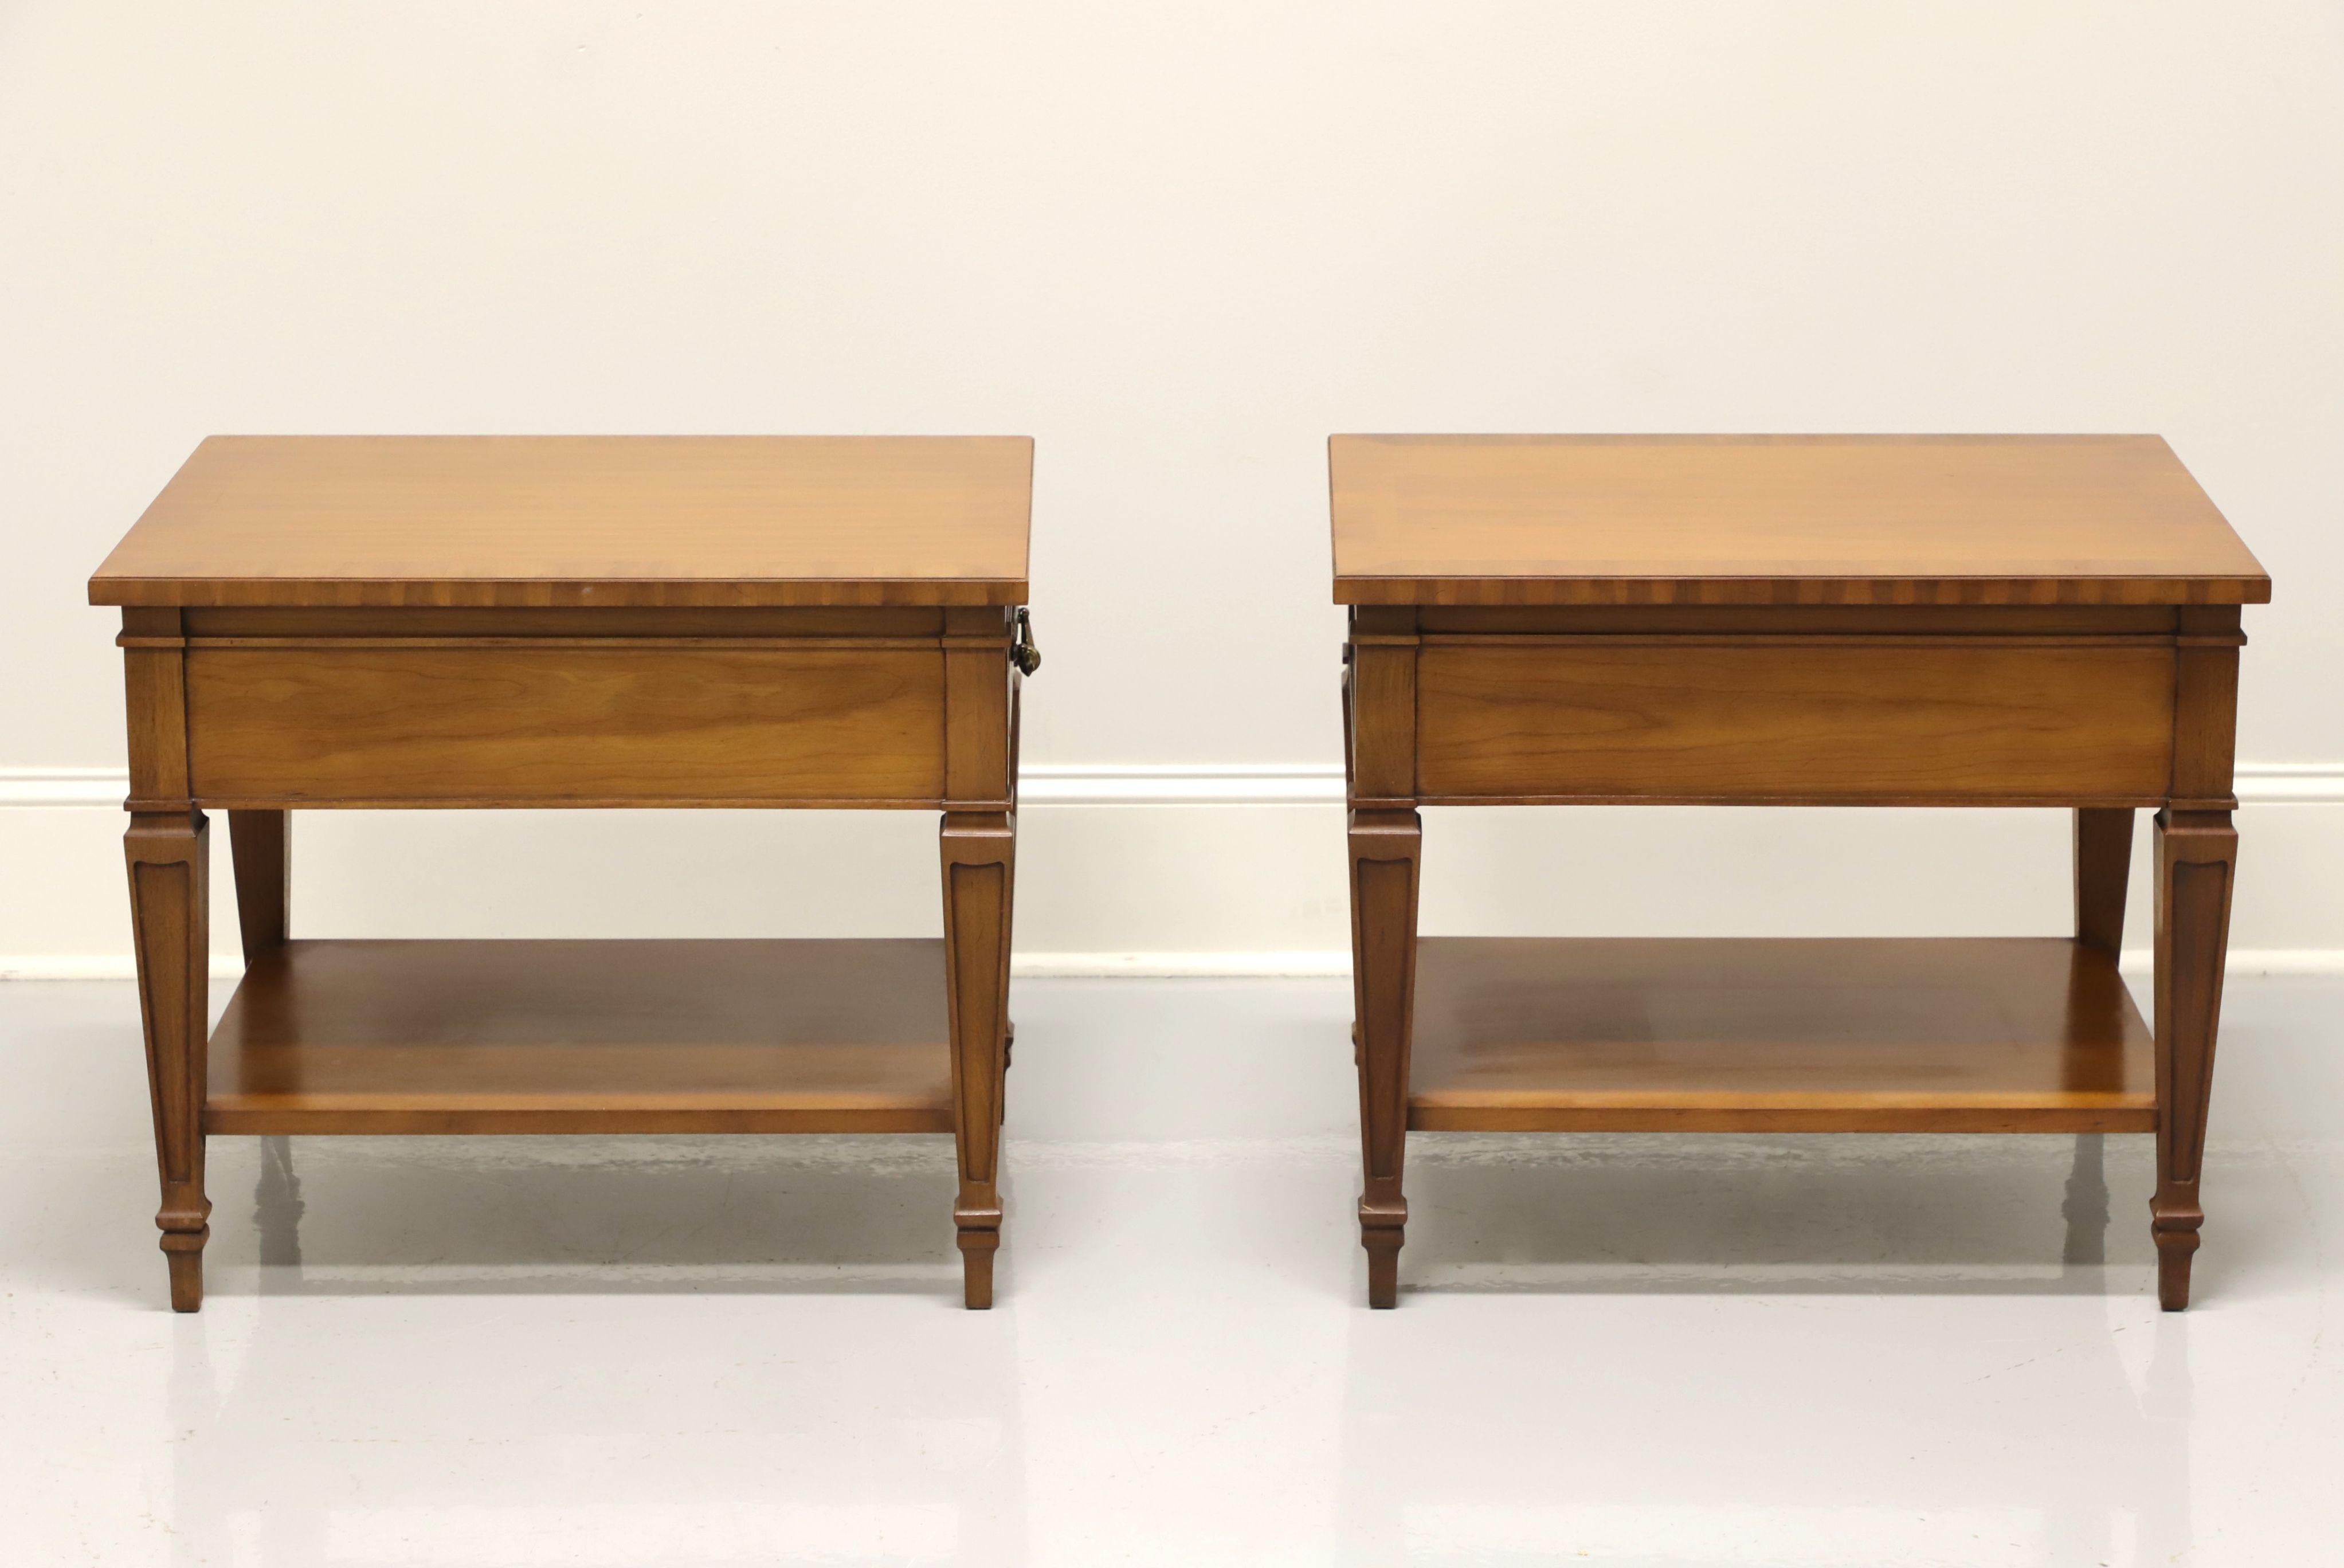 A pair of Mid Century side tables by Drexel Heritage, from their Repertoire Collection. Walnut with brass hardware, banded top with squared edge, burl to drawer front, undertier shelf, and spade feet. Features one drawer of dovetail construction and